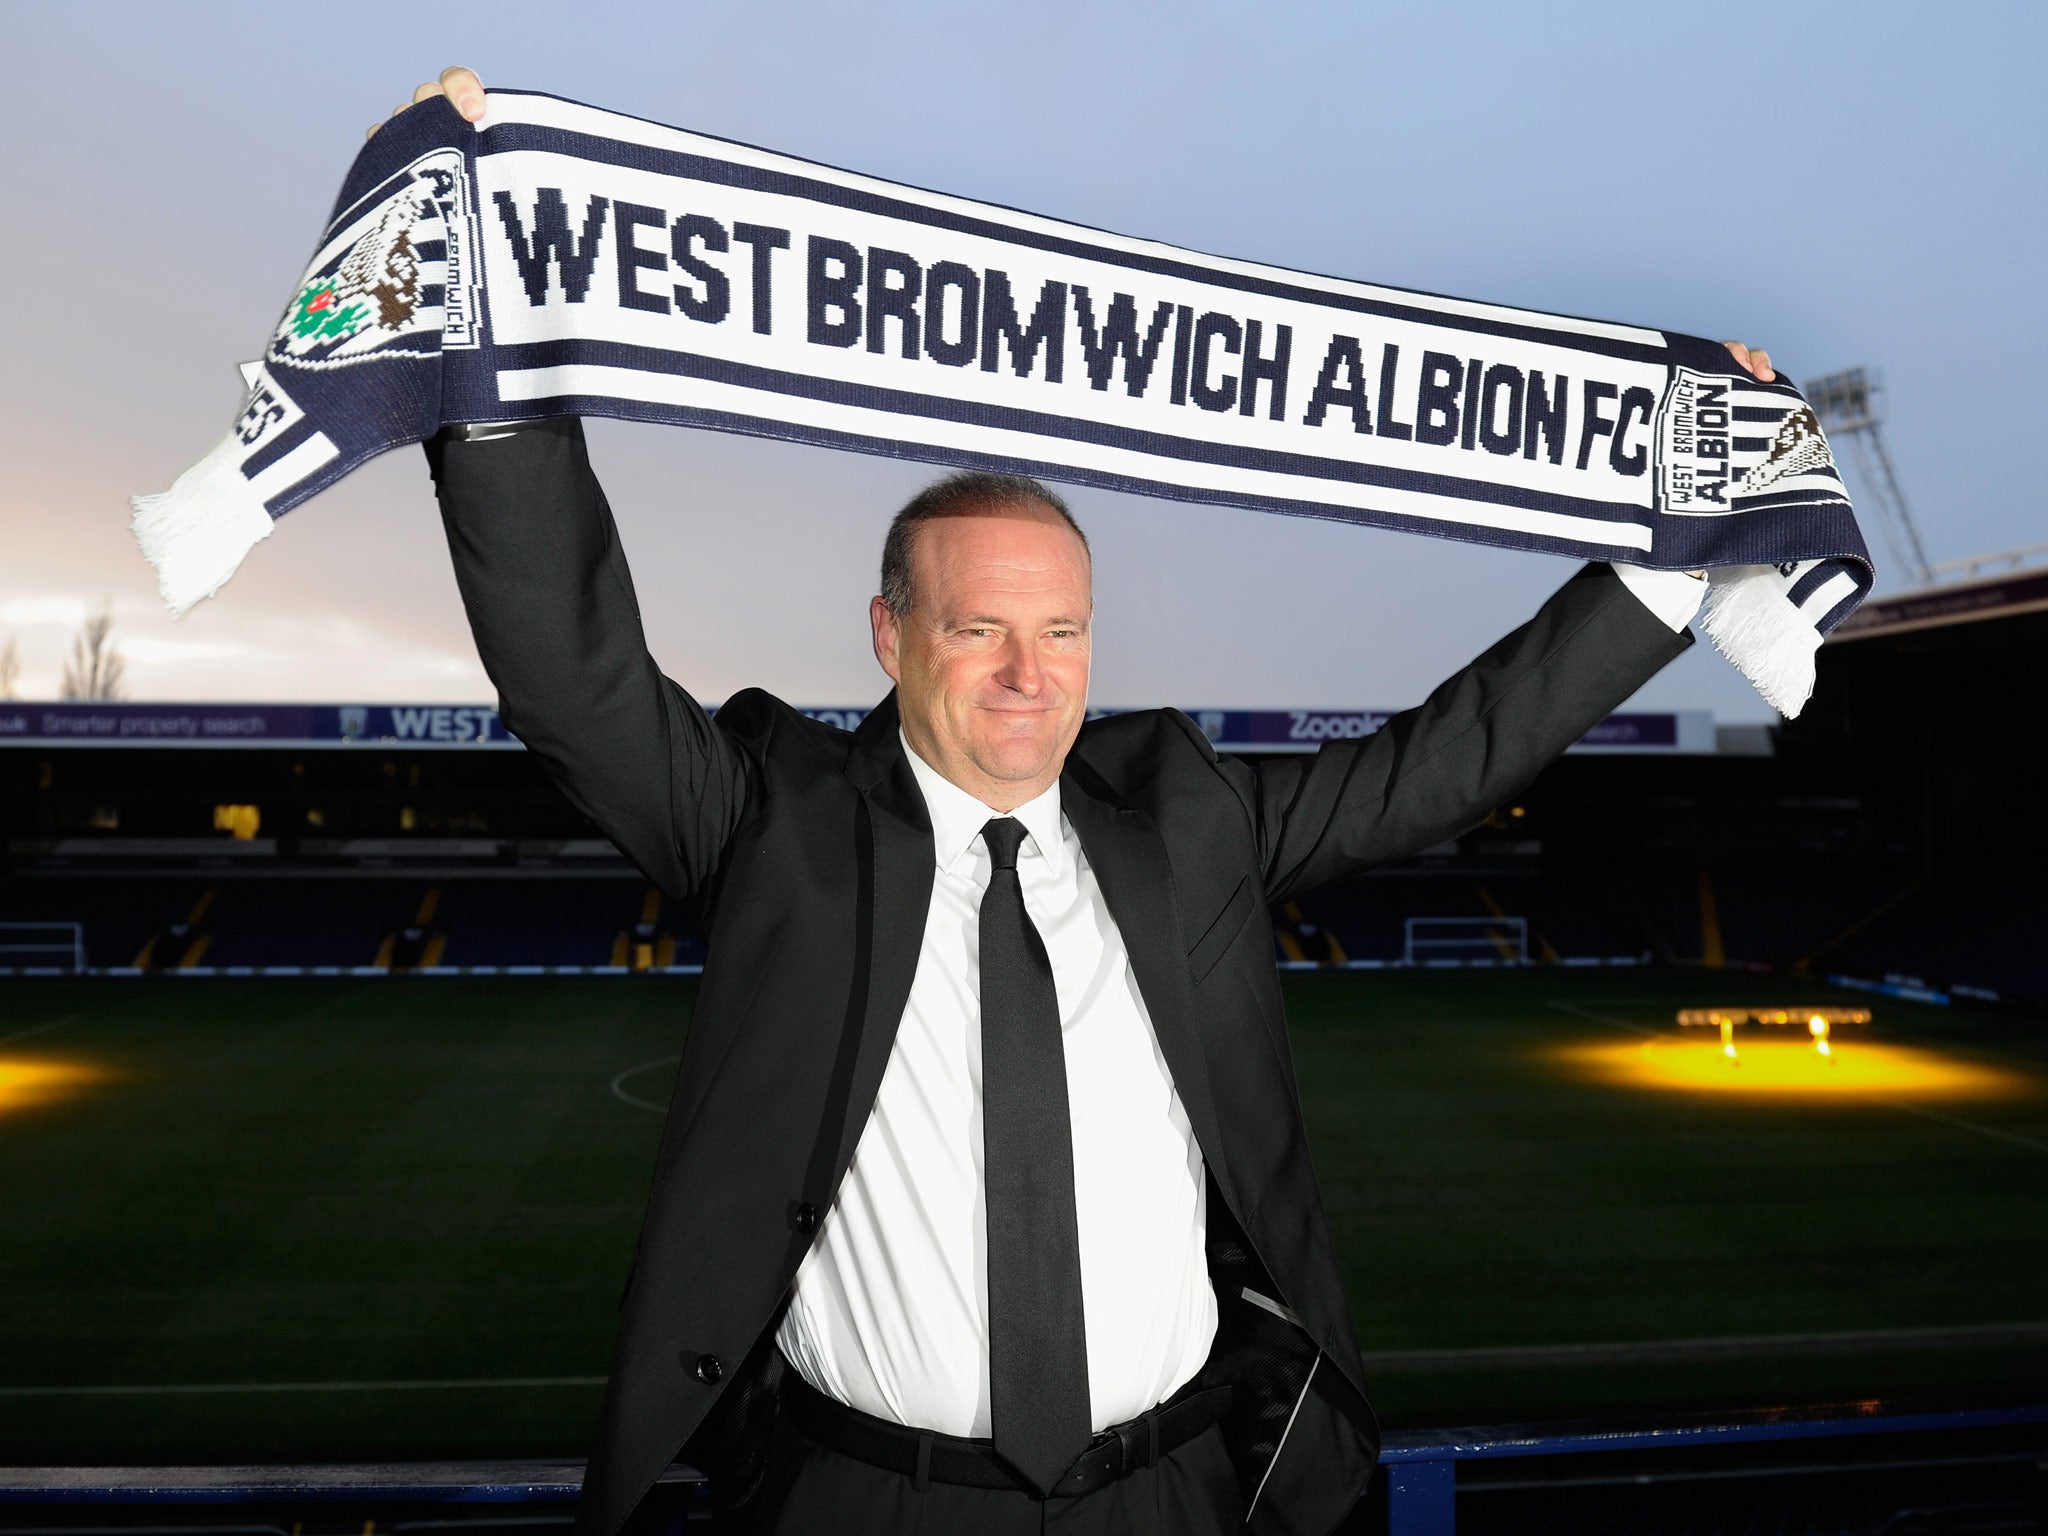 West Brom manager Pepe Mel